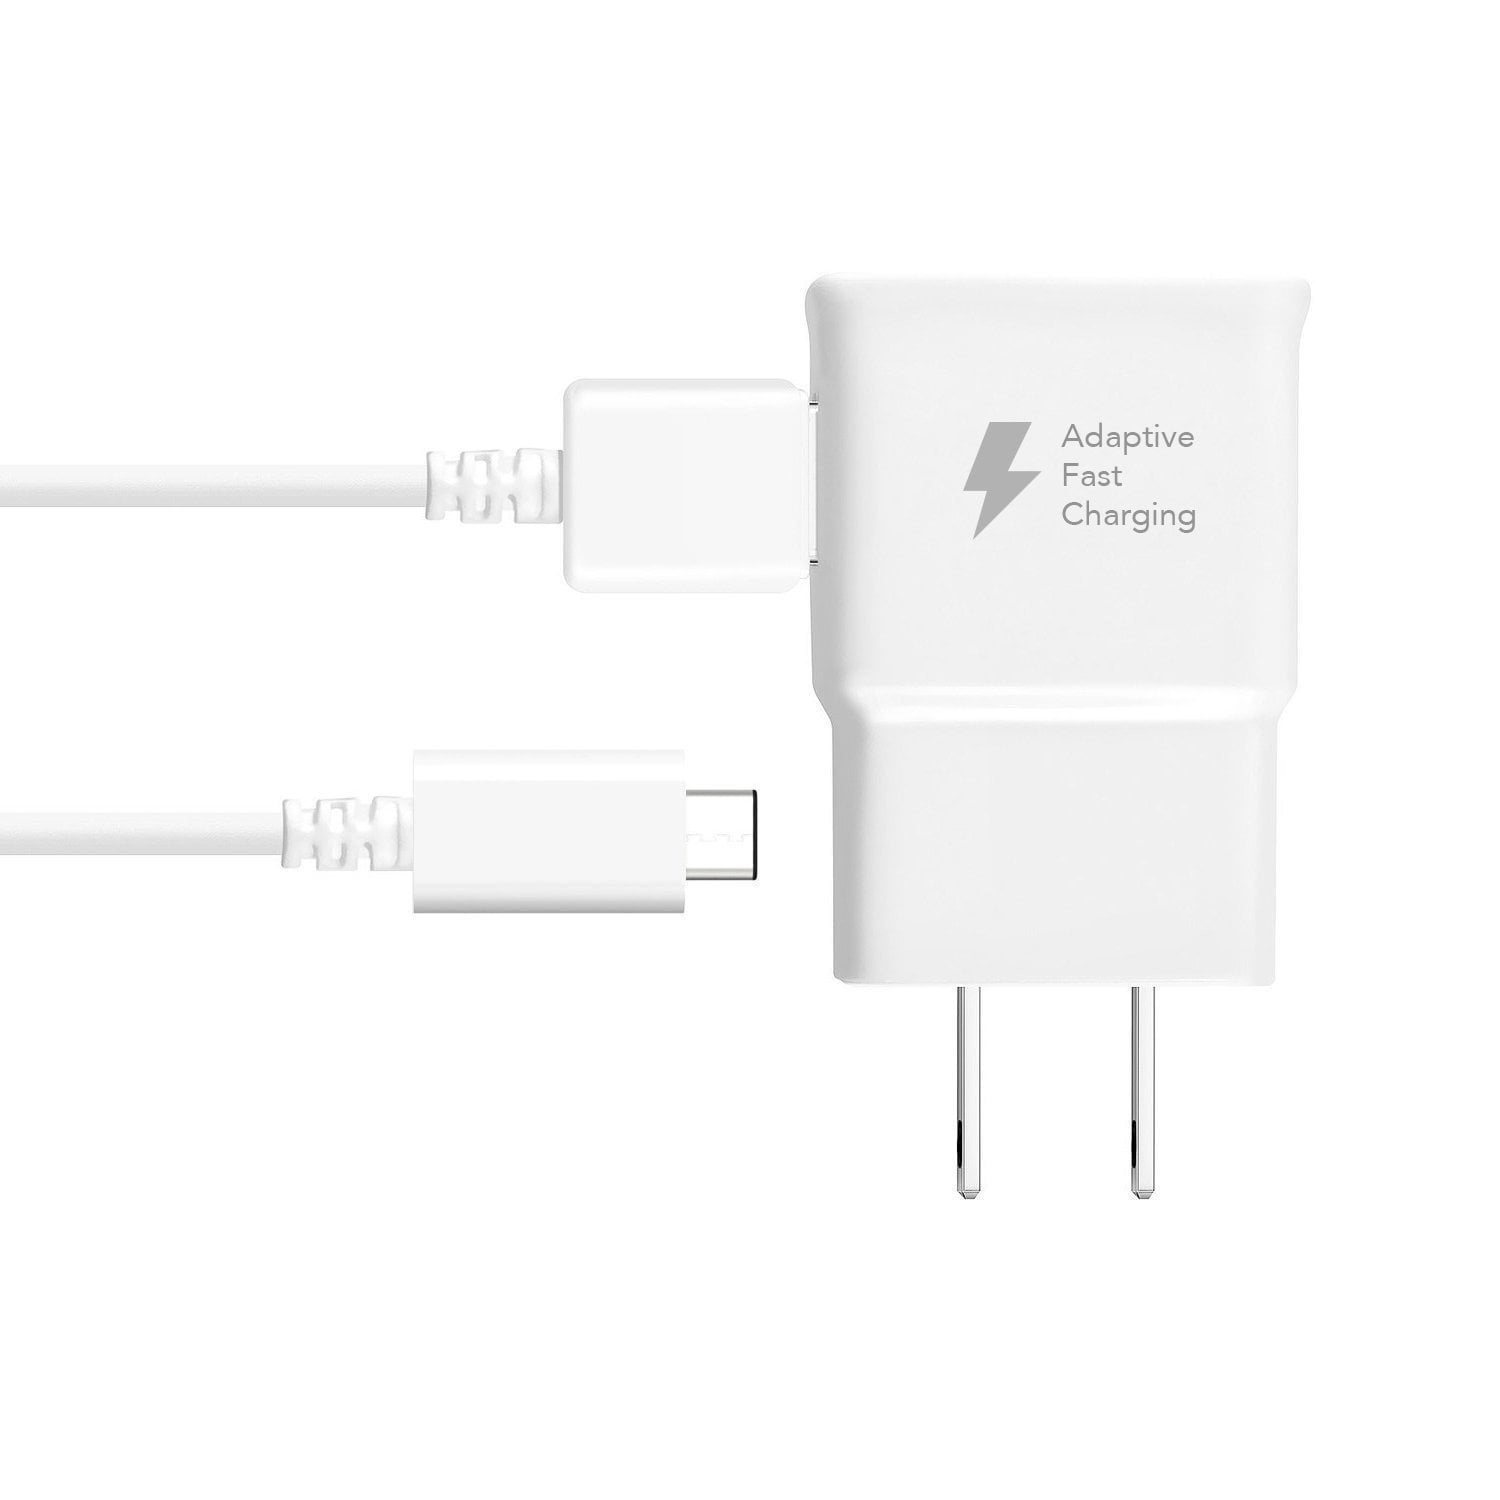 Adaptive Fast Charger Compatible with HTC U Play [Wall Charger + Type-C USB Cable] Dual voltages for up to 60% Faster Charging! WHITE - New